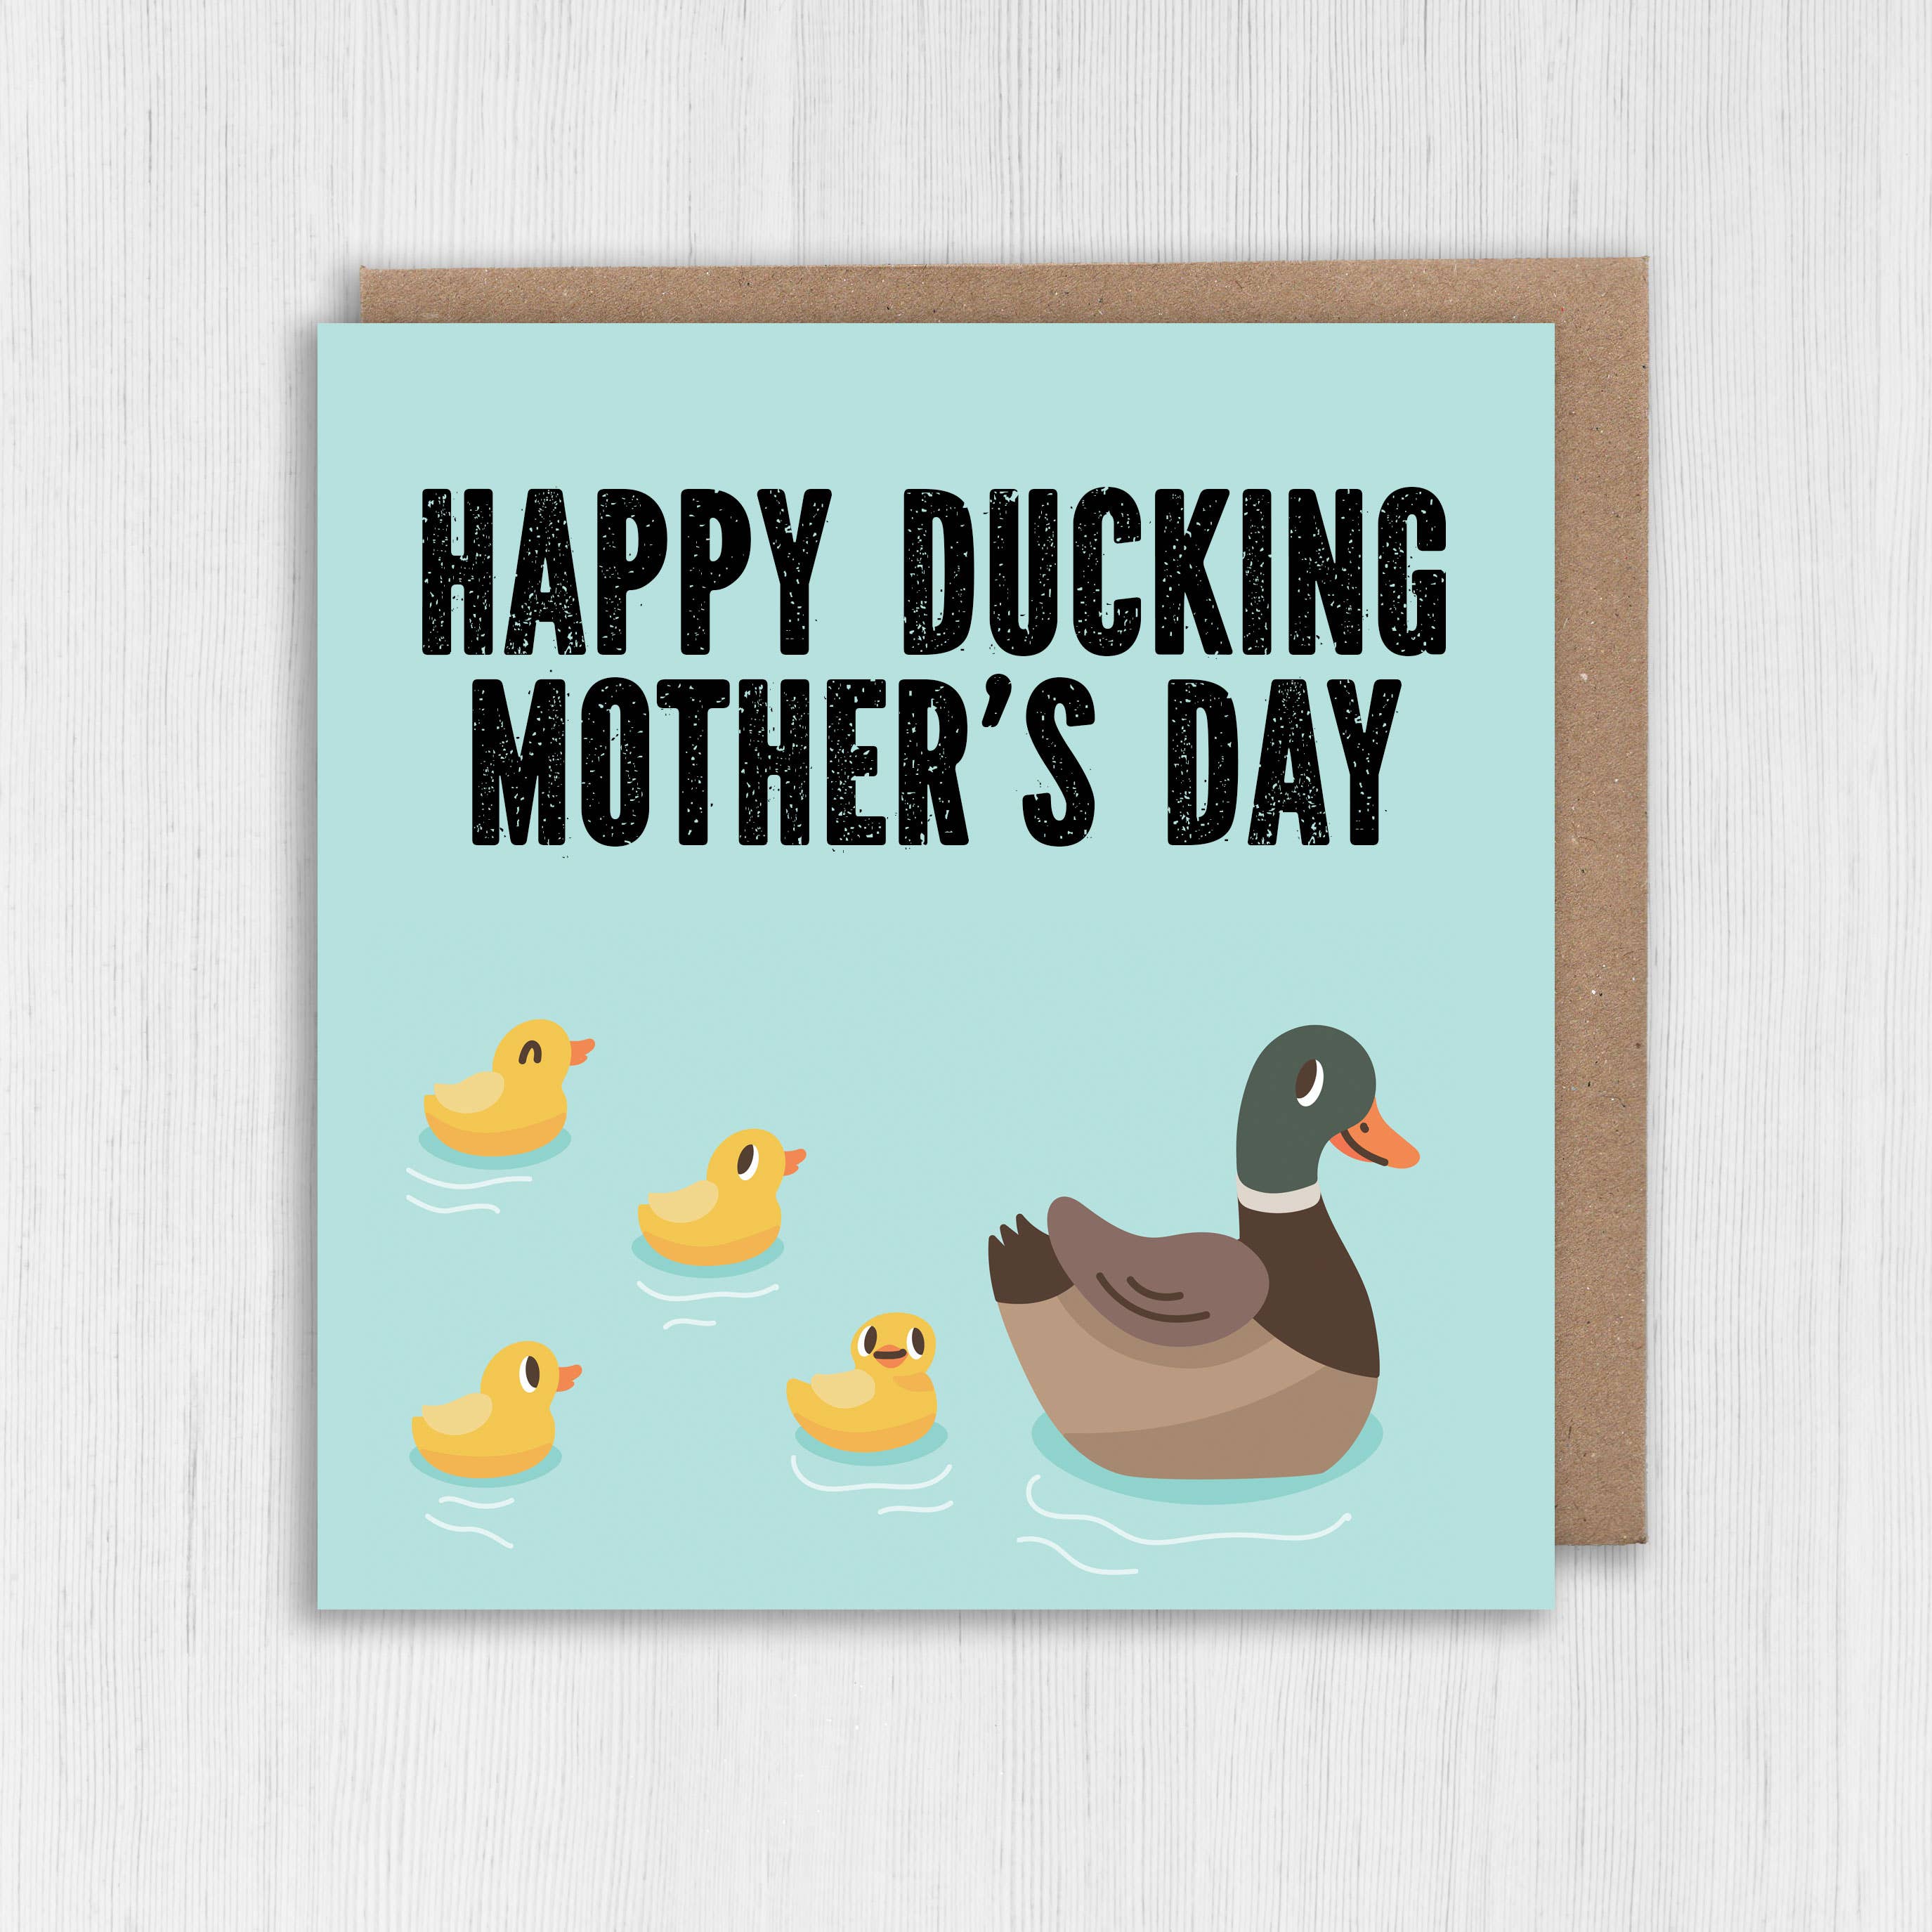 Mother's Day card: Happy Ducking Mother's Day